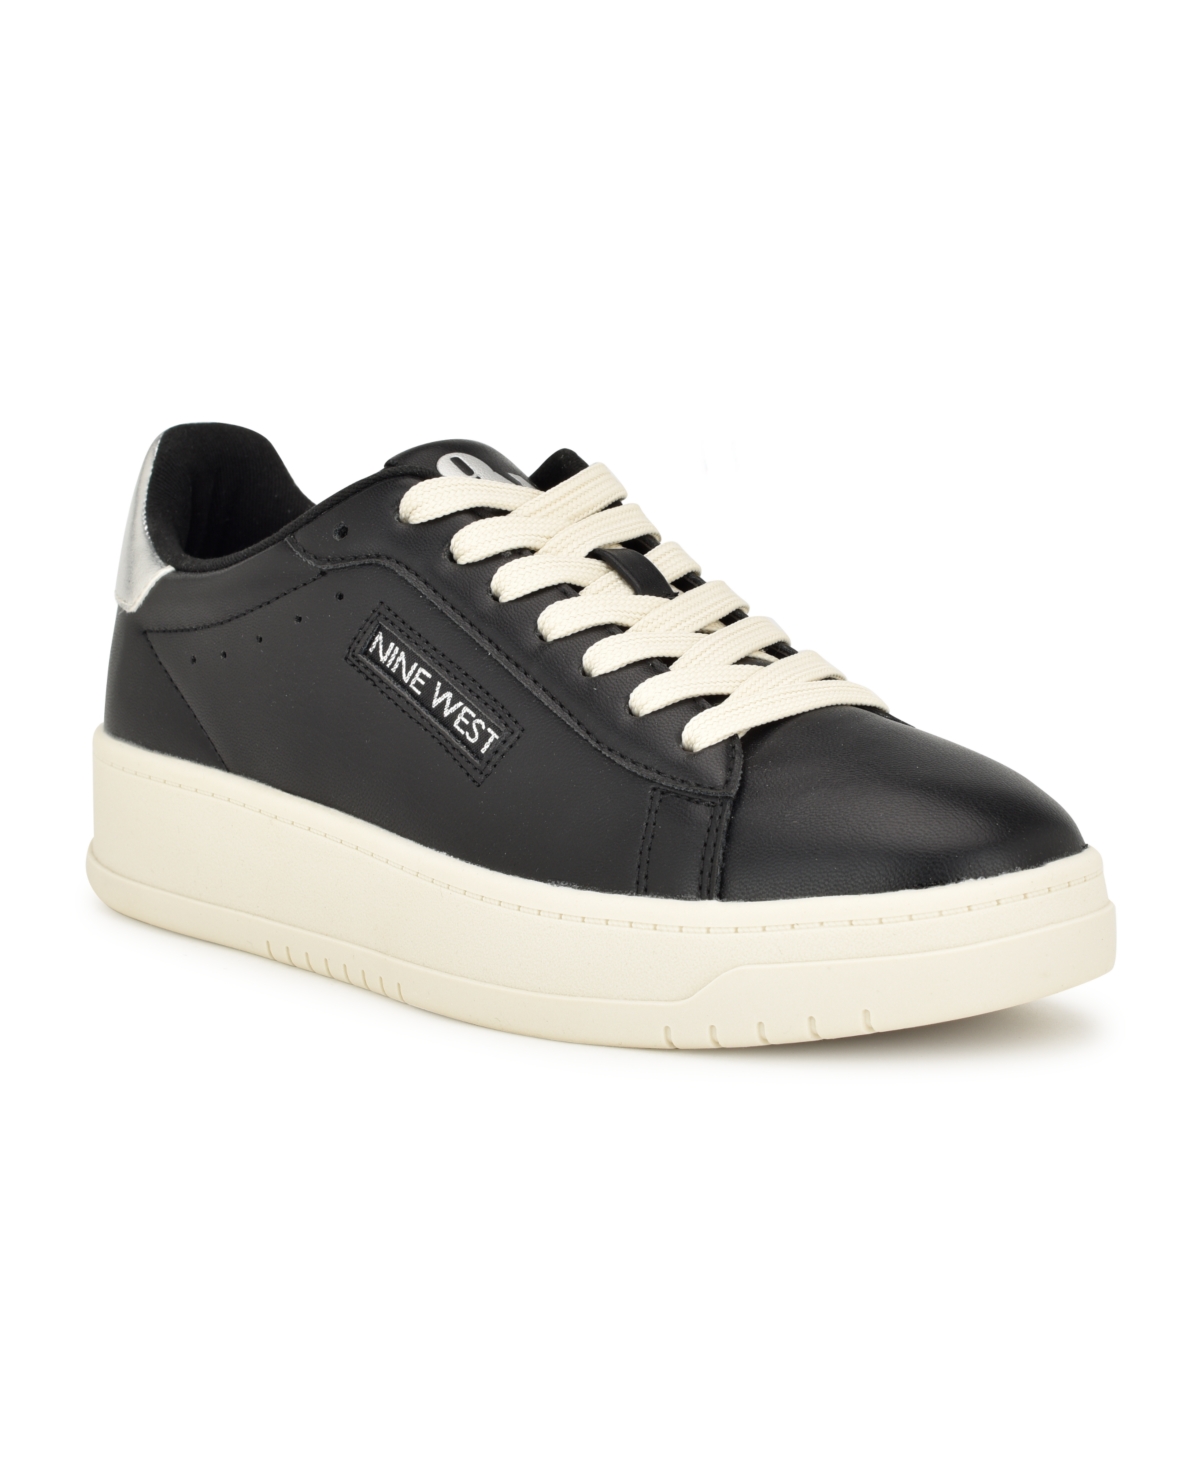 Women's Dunnit Lace-Up Round Toe Casual Sneakers - Black